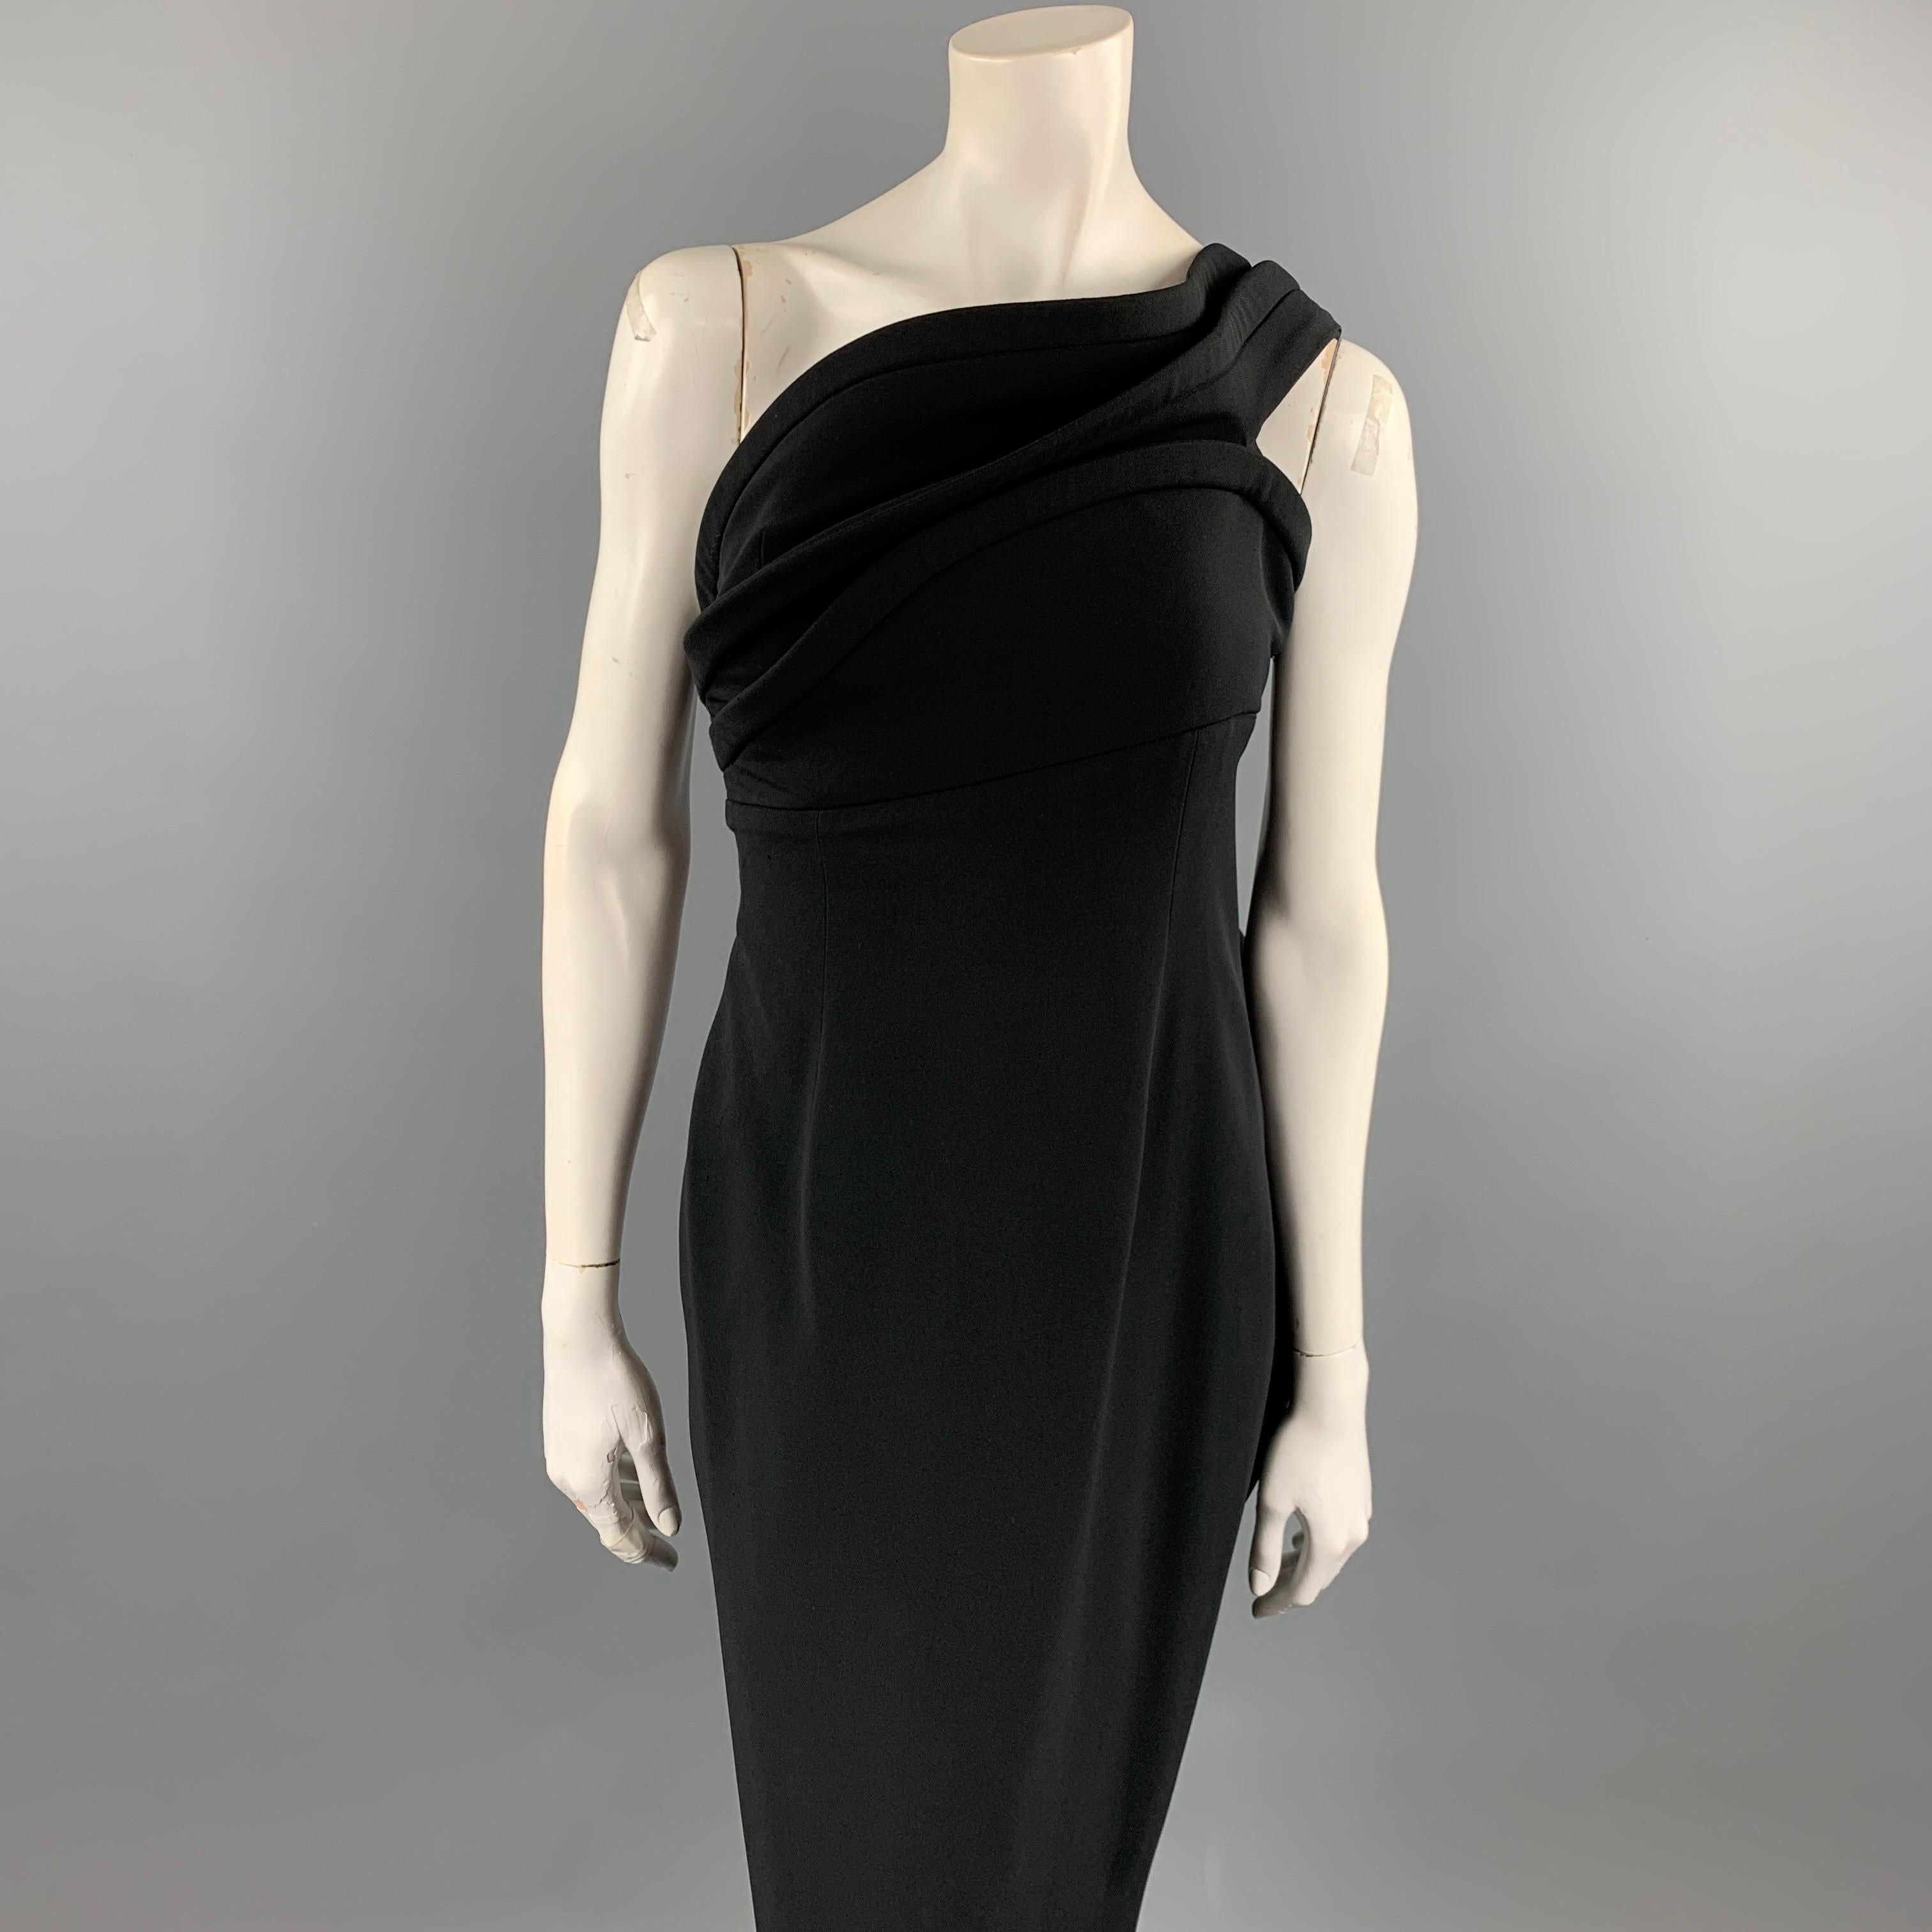 BRANDON MAXWELL gown comes in a black viscose blend featuring a column style, ruffle details, one shoulder, ad a side zipper closure. Made in USA.

Very Good Pre-Owned Condition.
Marked: 6

Measurements:

Bust: 30 in.
Waist: 28 in.
Hip: 36